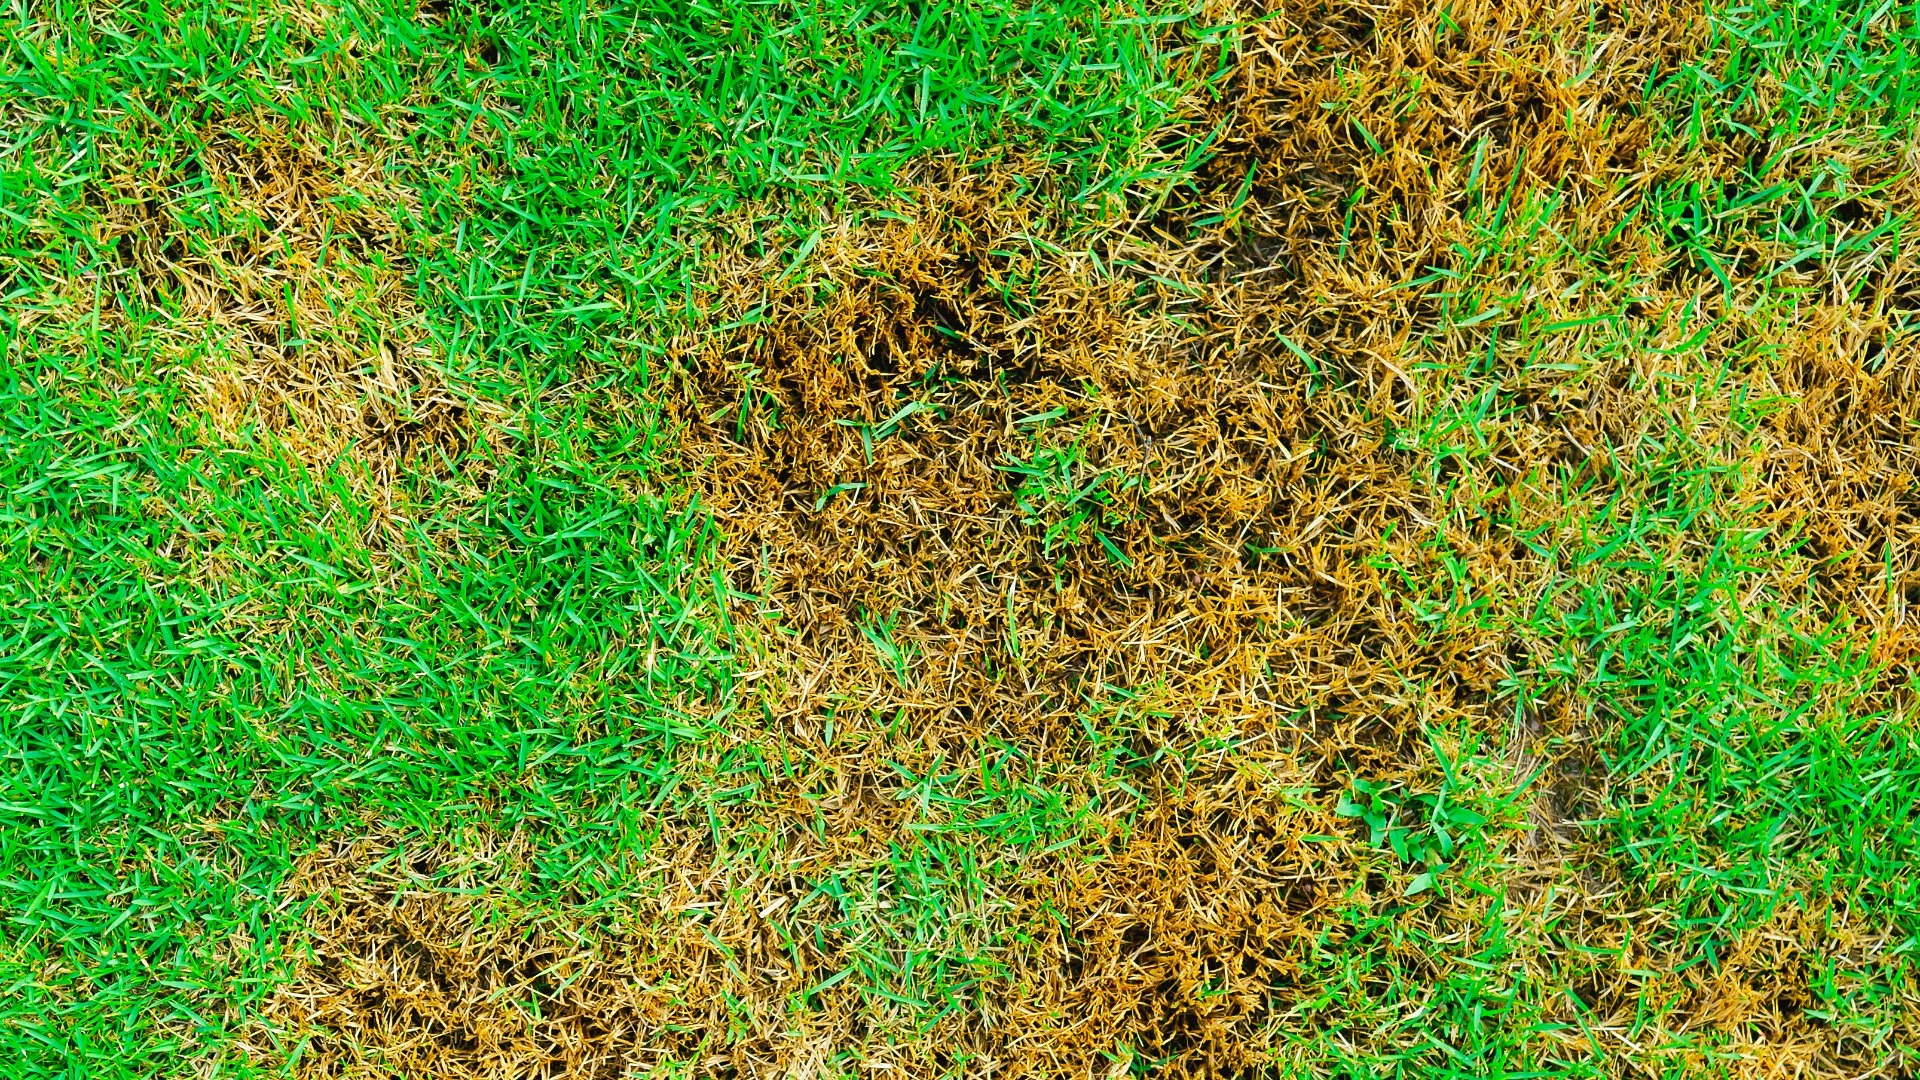 What Conditions Can Spur the Development of Lawn Diseases?